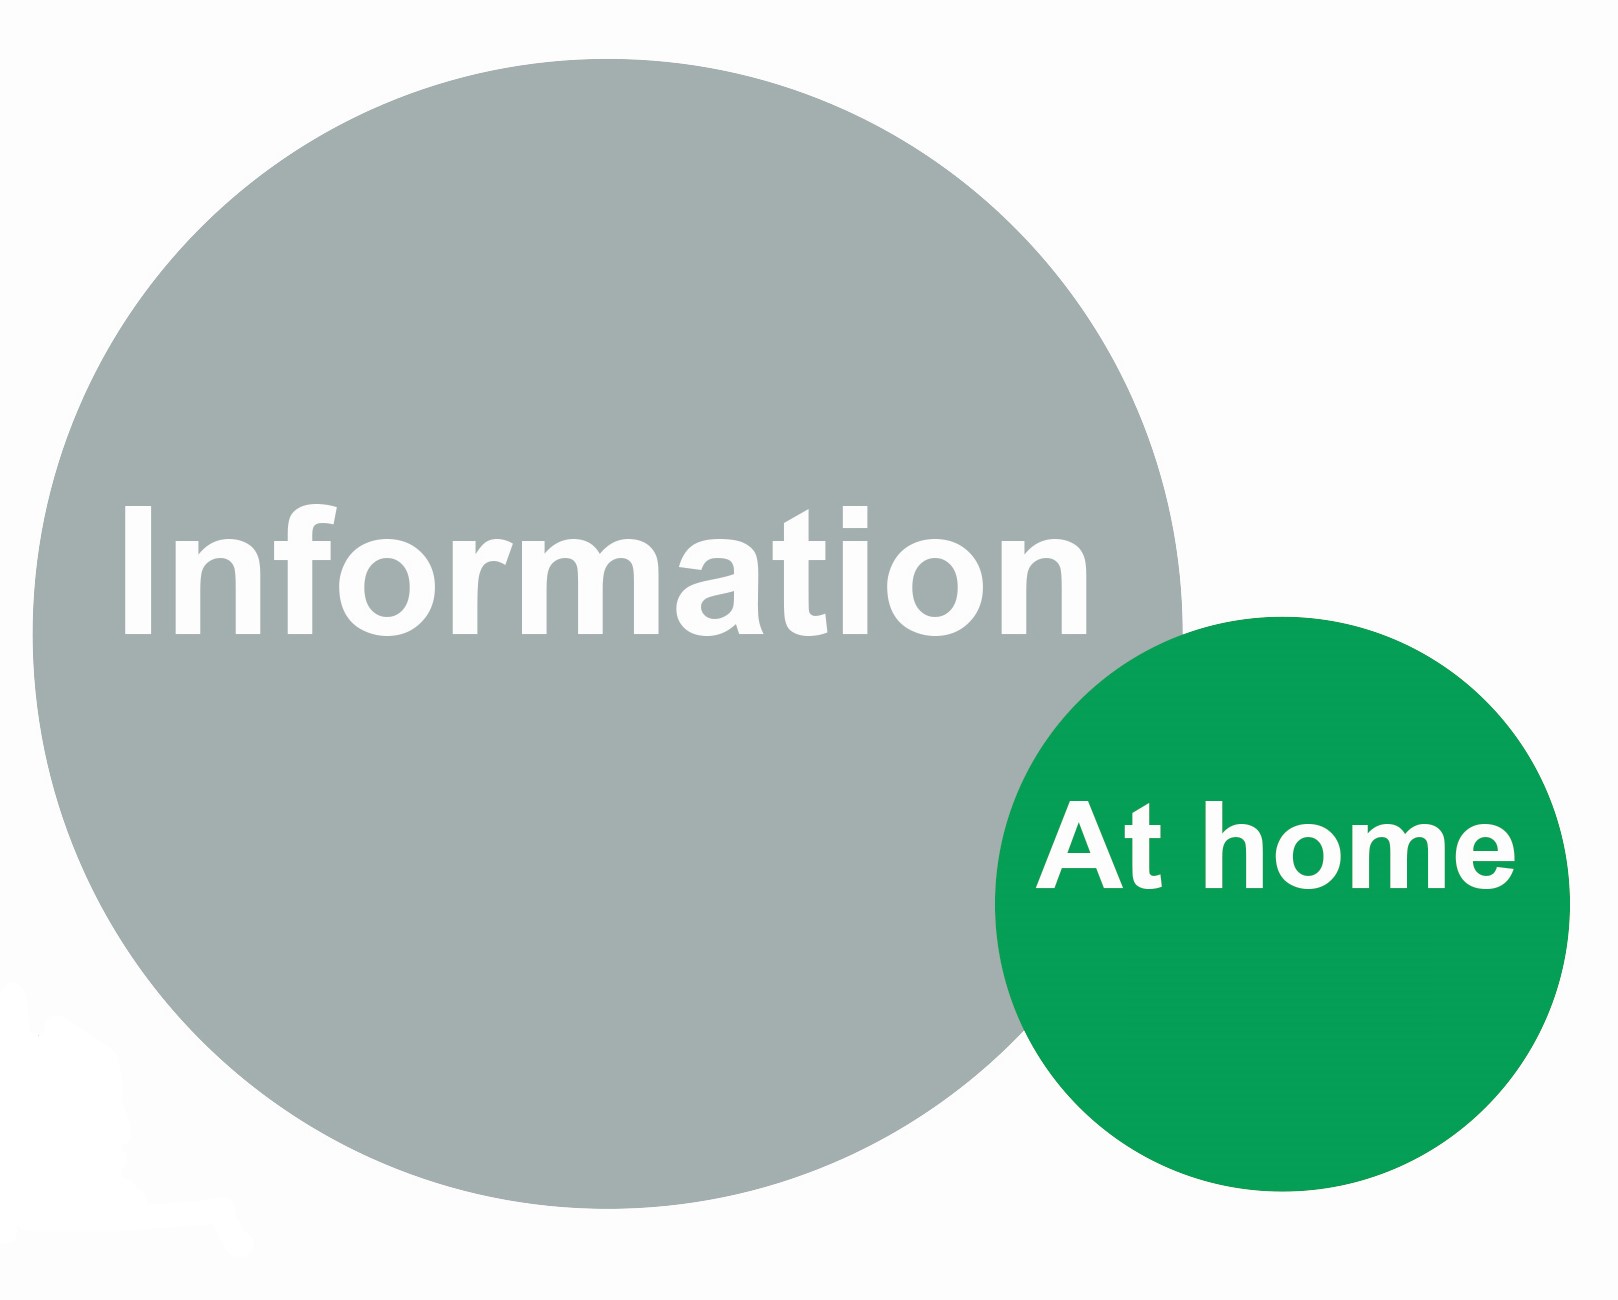 Information at home